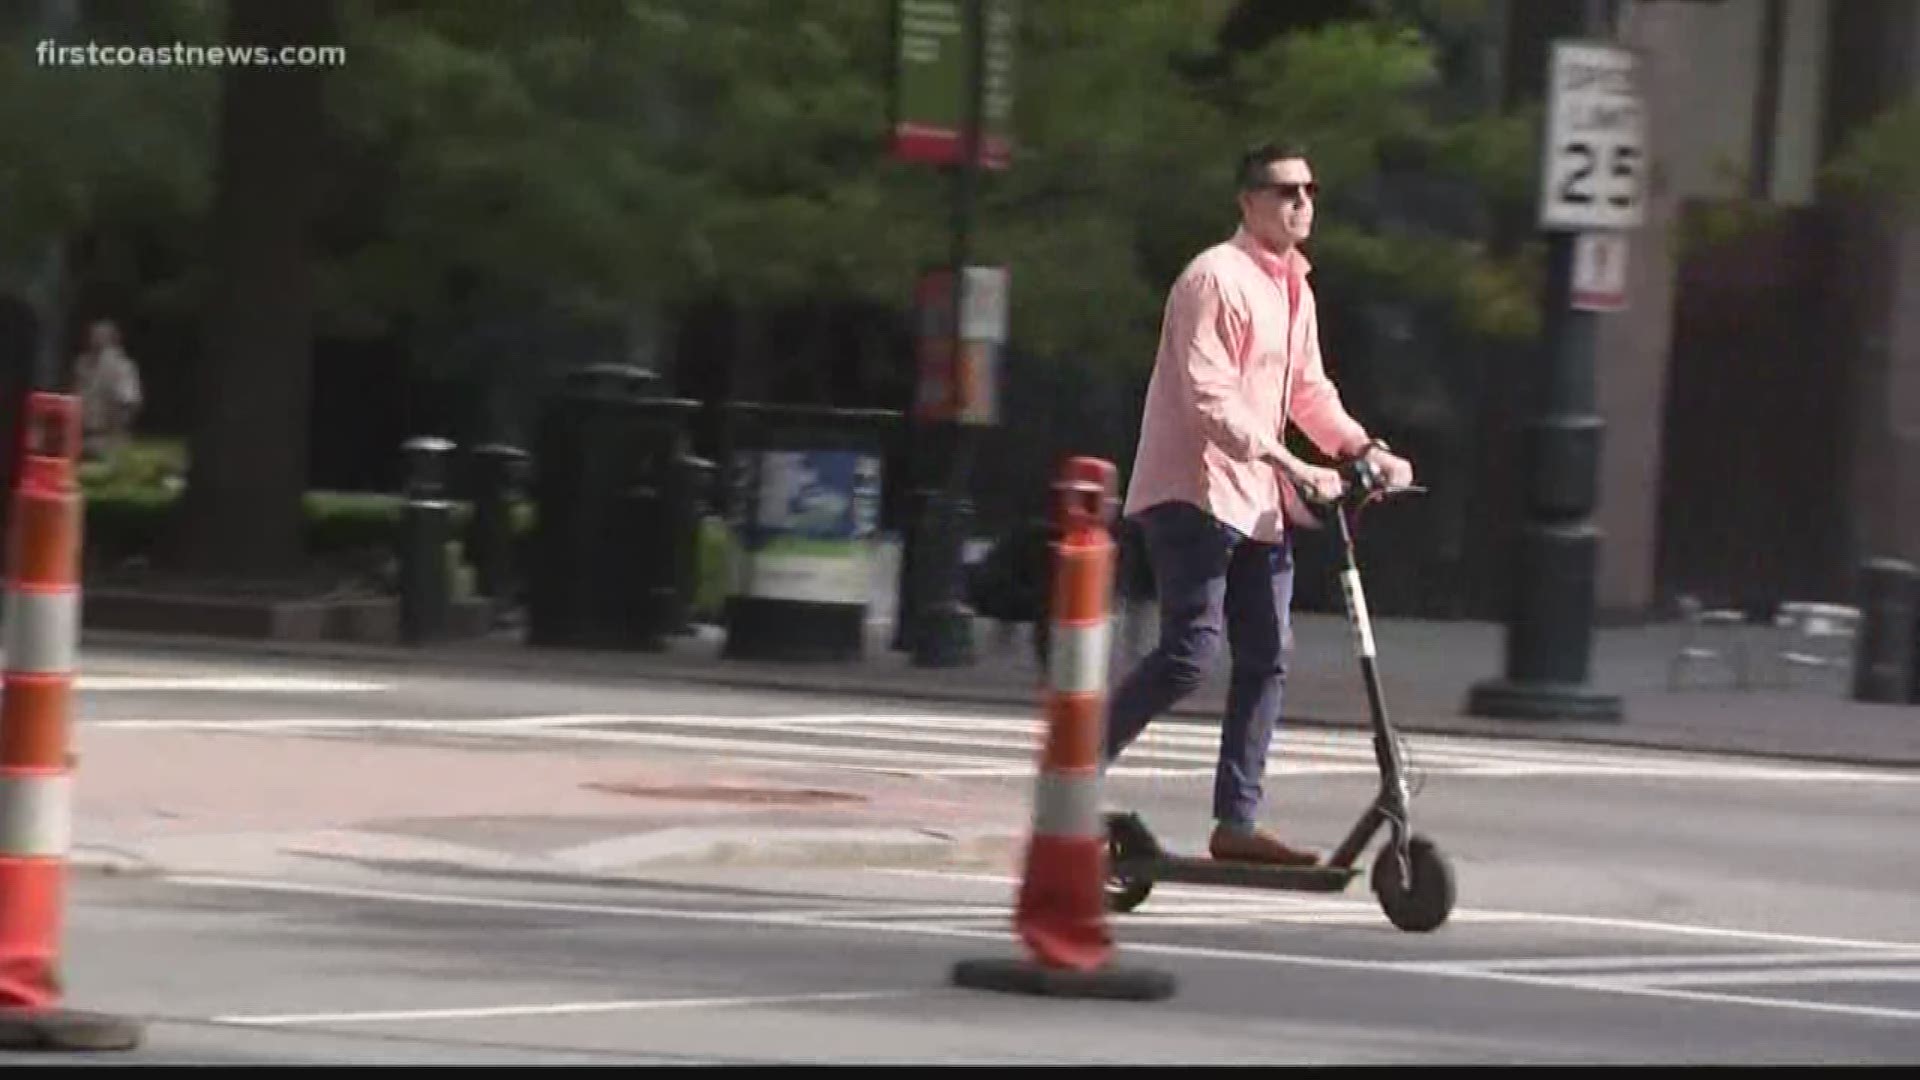 On Tuesday night, the City Council voted unanimously to adopt a one-year pilot program that would allow for e-scooters and bicycles in Downtown Jacksonville.